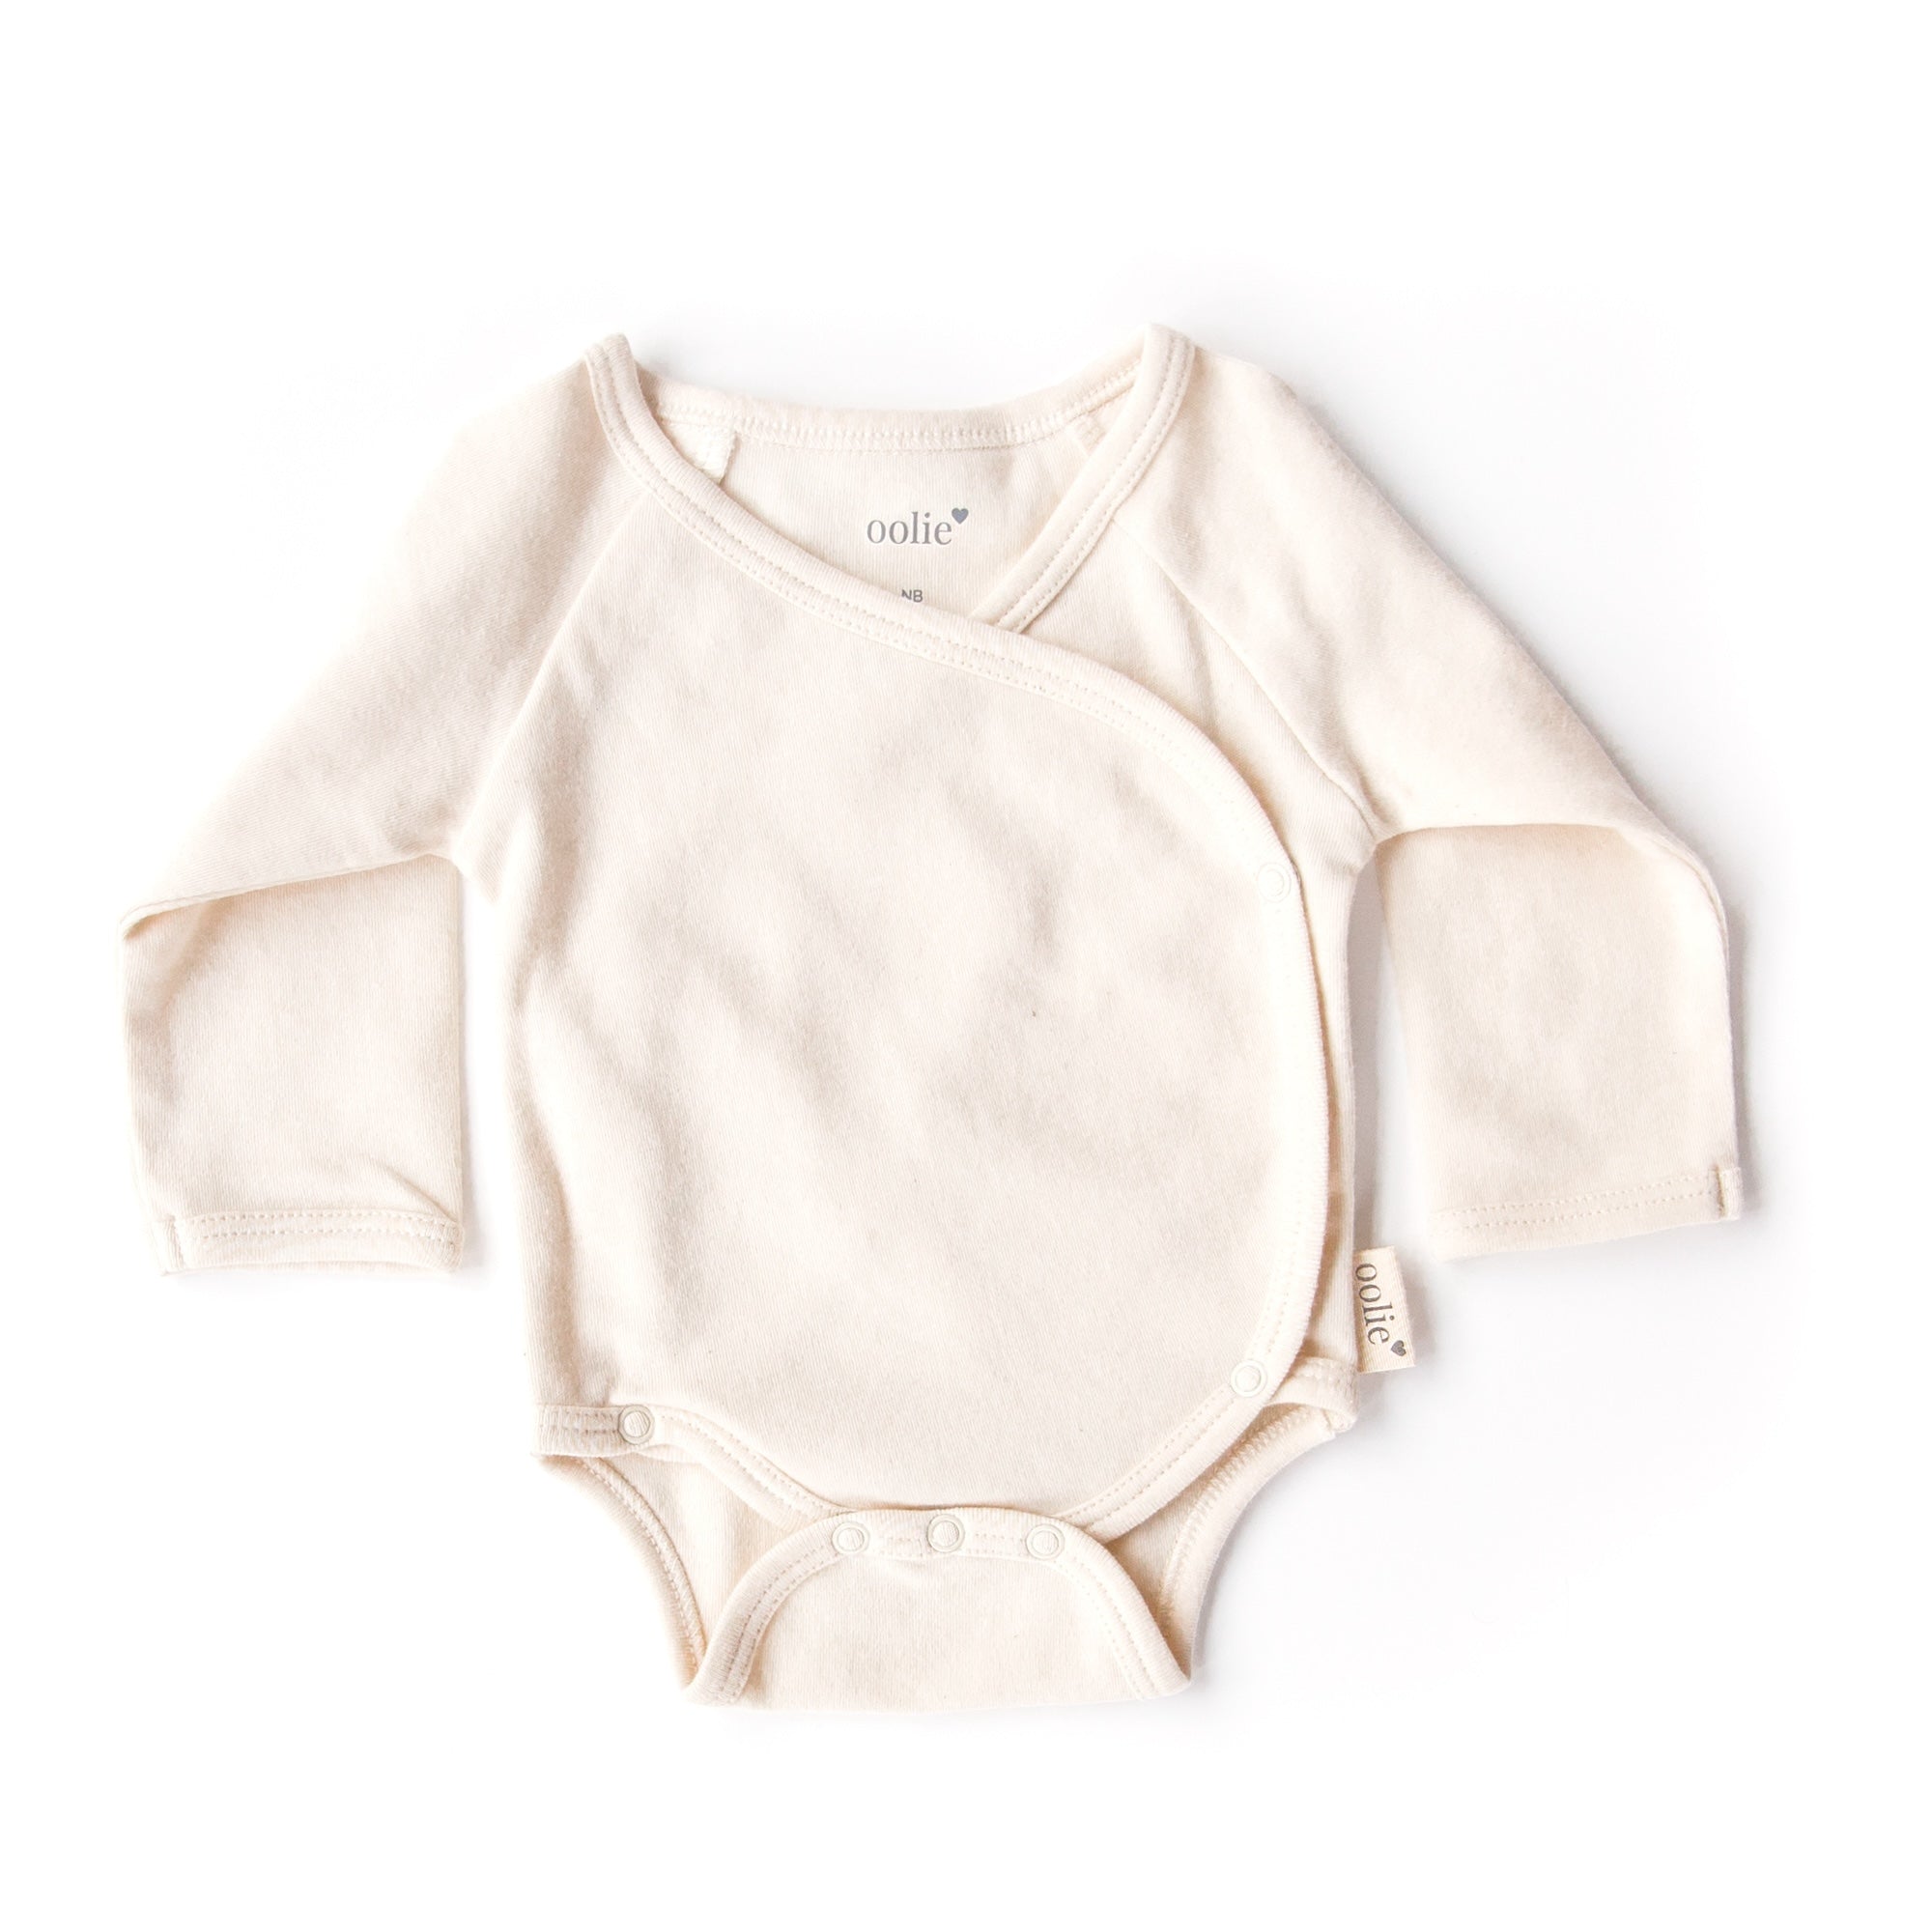 A natural Oolie organic cotton onesie, unprinted, revealing its natural, undyed, unbleached color.